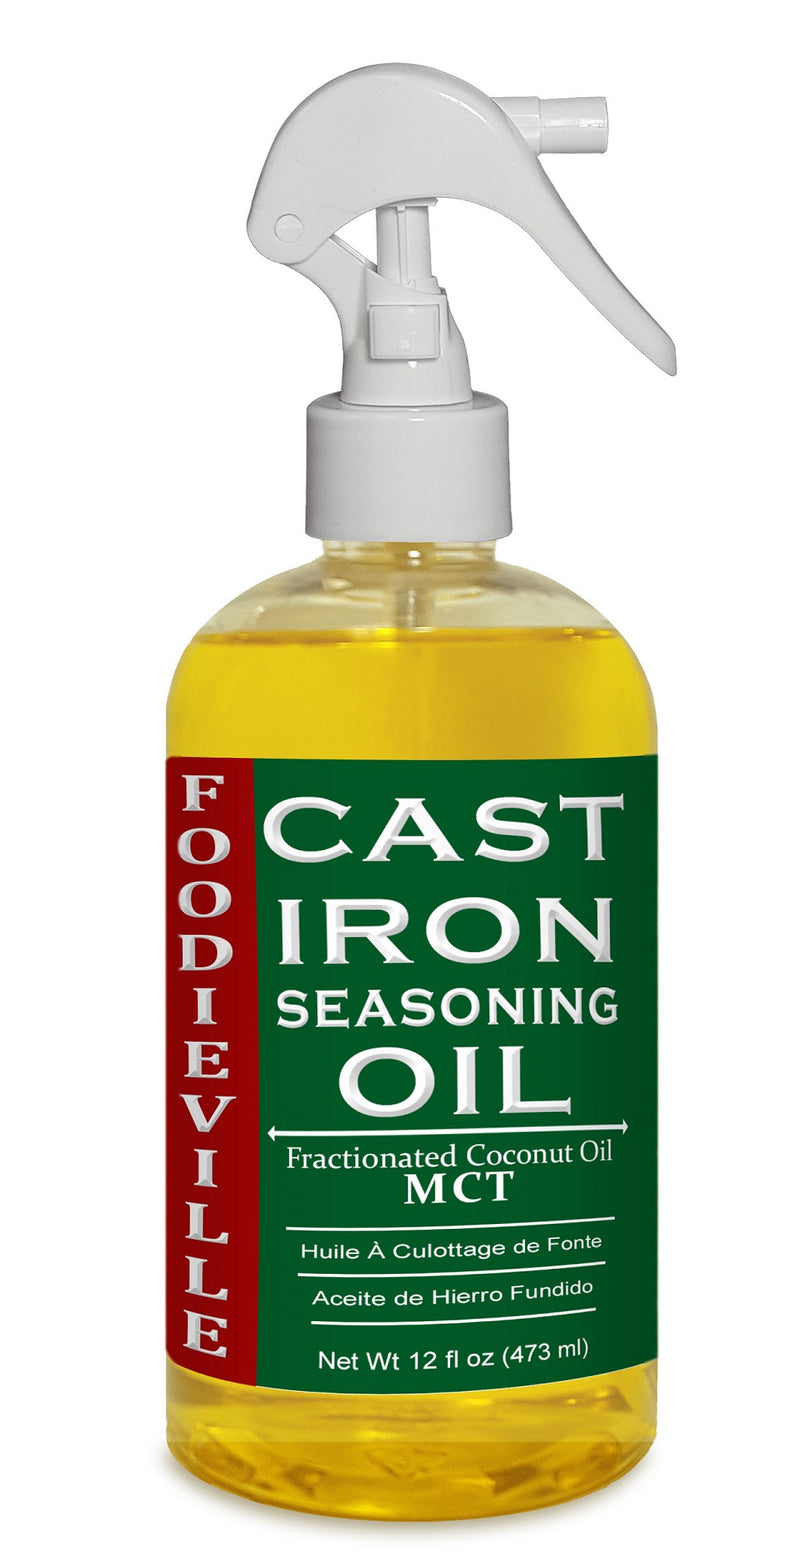 Walrus Oil - Cast Iron Oil, for Restoring, Seasoning, and Maintaining Cast Iron Cookware 100% Vegan, 8 oz Bottle